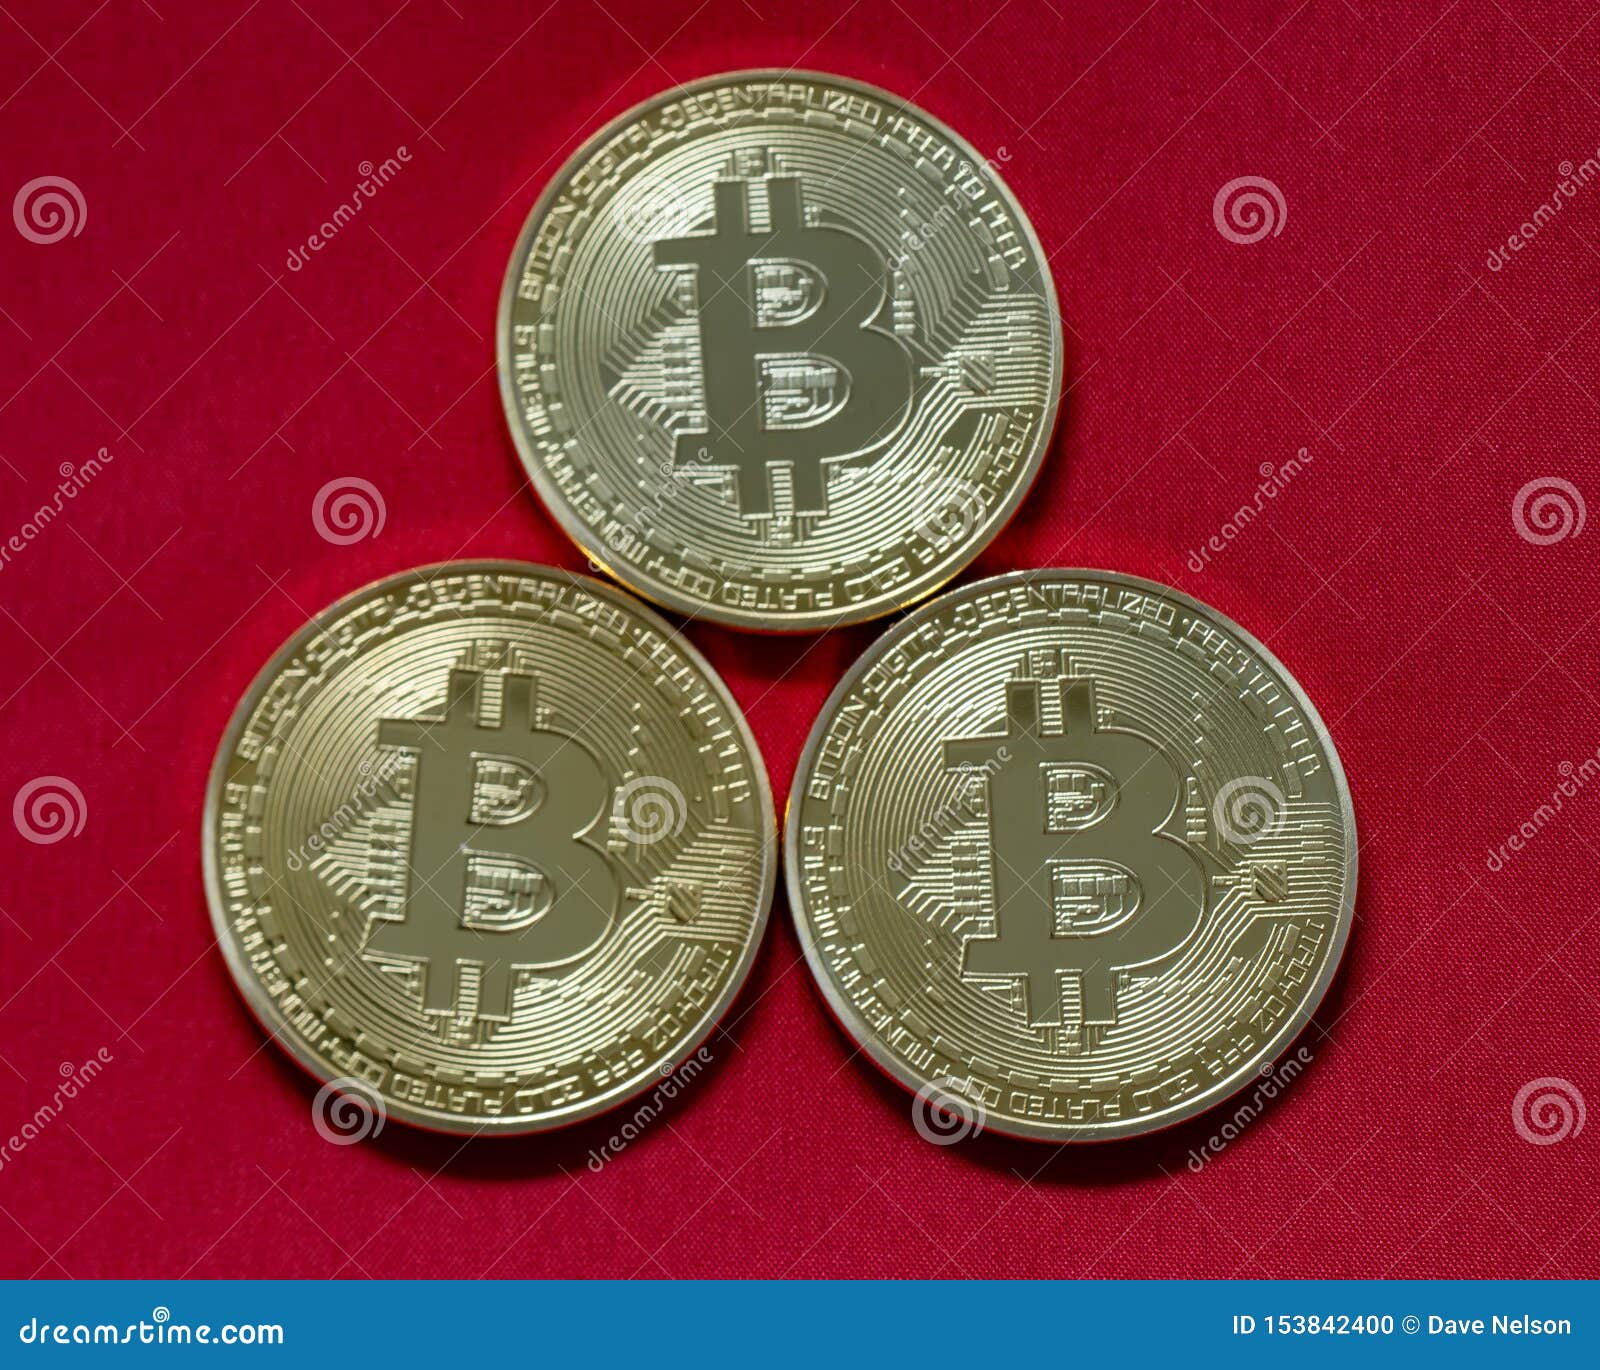 what are 3 bitcoins worth